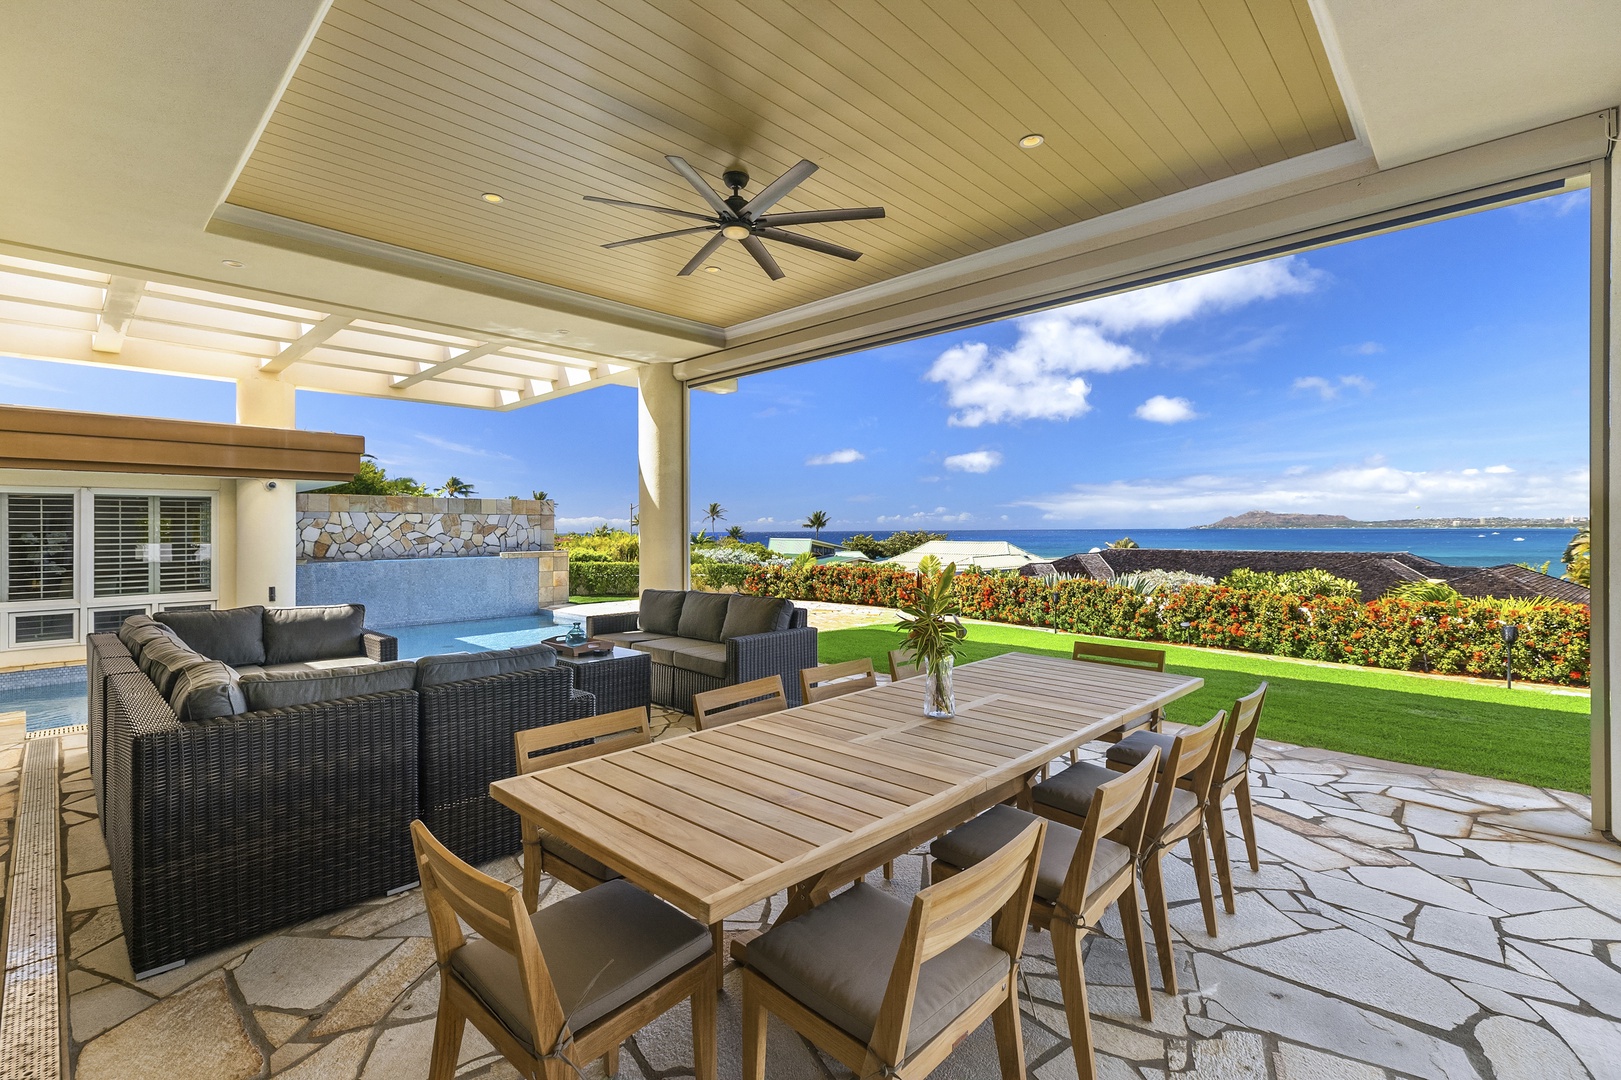 Honolulu Vacation Rentals, Hale Makana - Dine on the lanai with ample seating and ocean views